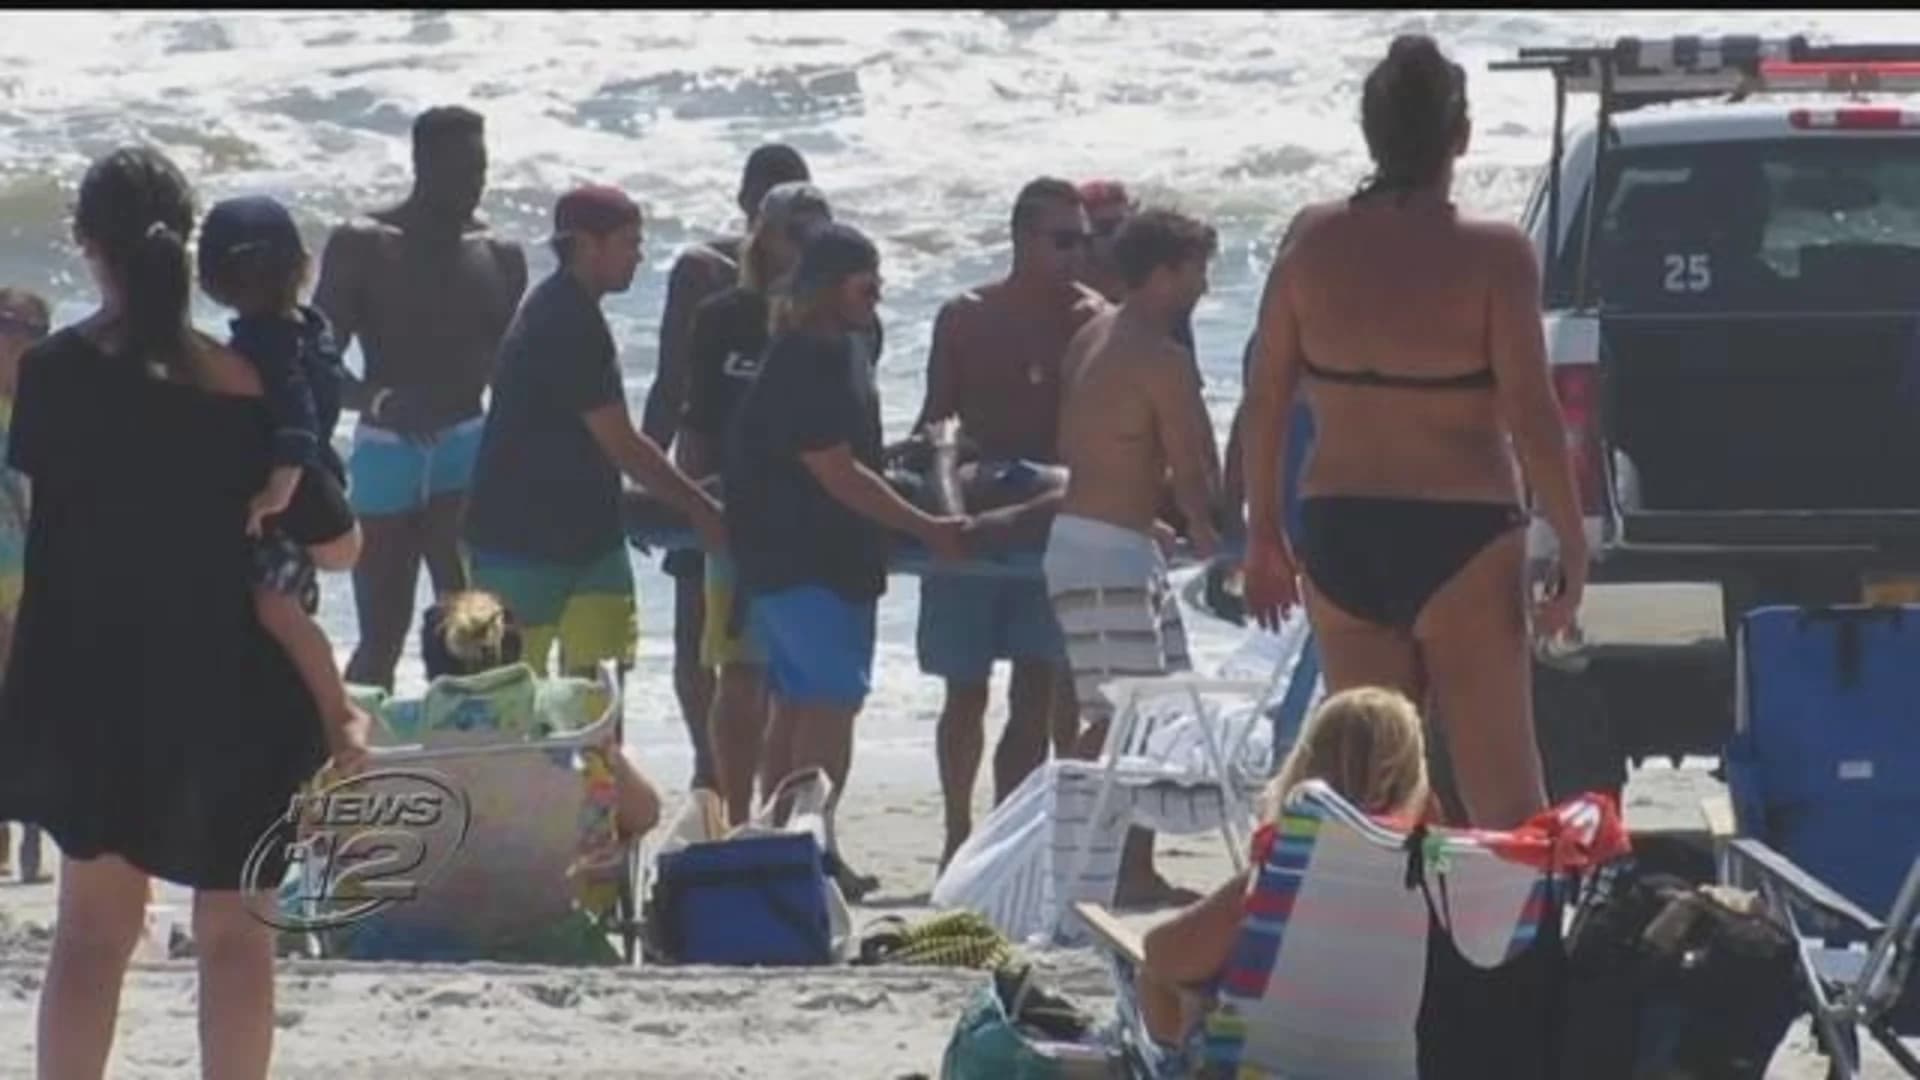 Lifeguards rescue man trapped in Long Beach rip current